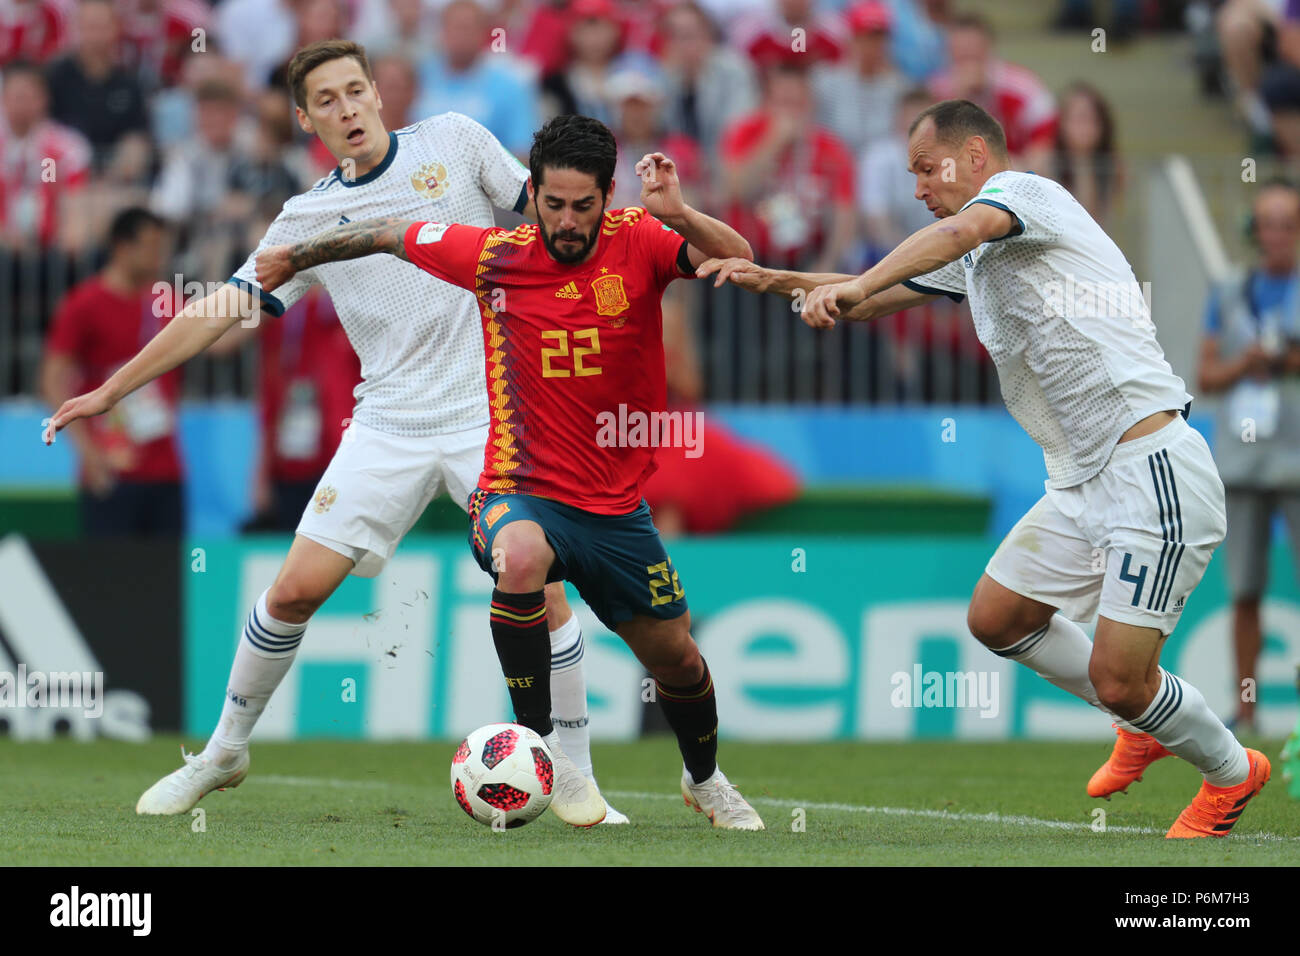 Daler Kuzyaev, Isco, Sergei Ignashevich SPAIN V RUSSIA SPAIN V RUSSIA, 2018 FIFA WORLD CUP RUSSIA 01 July 2018 GBC9012 2018 FIFA World Cup Russia STRICTLY EDITORIAL USE ONLY. If The Player/Players Depicted In This Image Is/Are Playing For An English Club Or The England National Team. Then This Image May Only Be Used For Editorial Purposes. No Commercial Use. The Following Usages Are Also Restricted EVEN IF IN AN EDITORIAL CONTEXT: Use in conjuction with, or part of, any unauthorized audio, video, data, fixture lists, club/league logos, Betting, Games or any 'live' services. Stock Photo